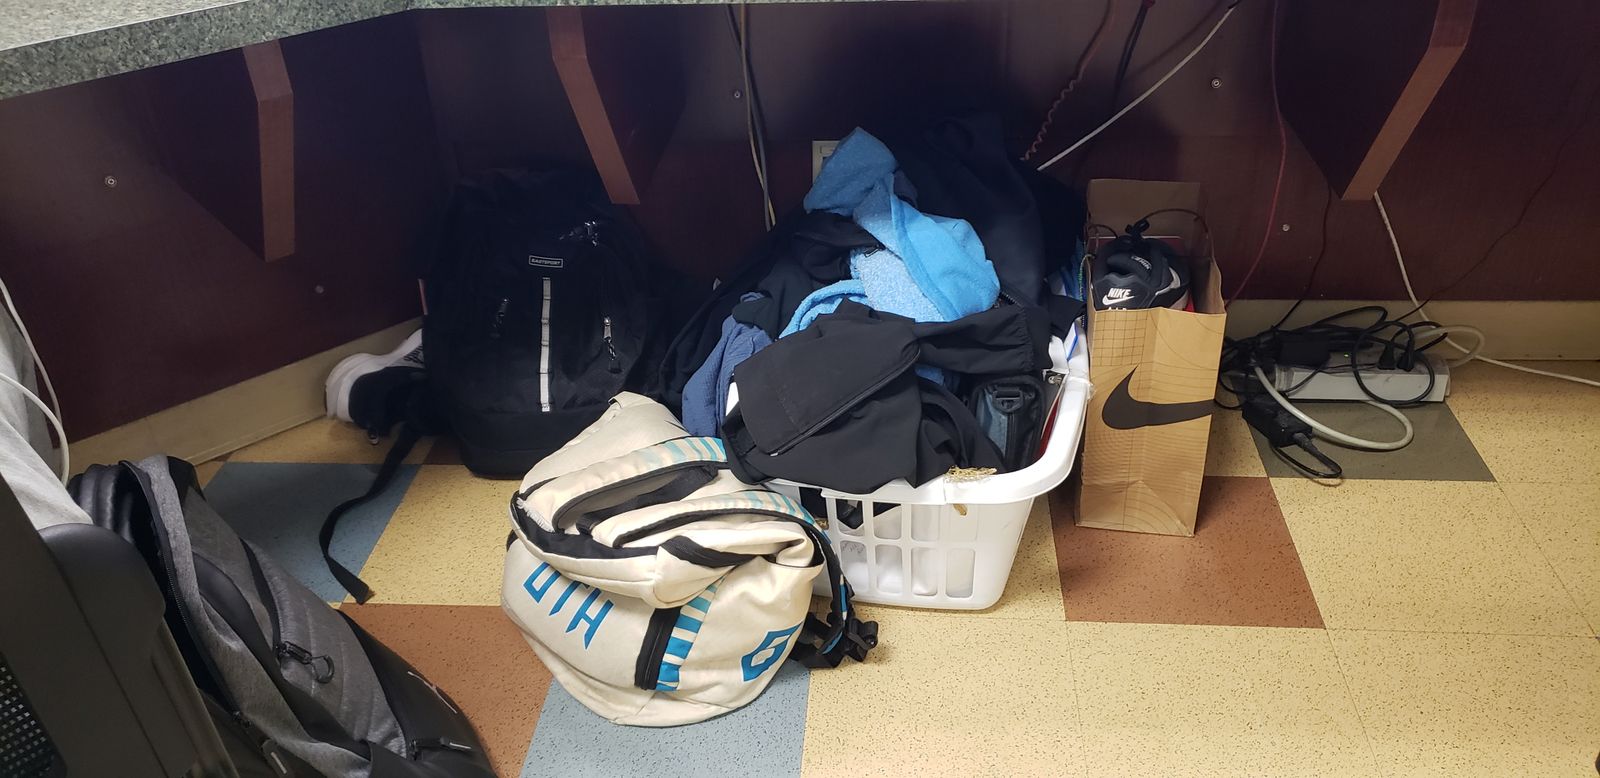 A laundry basket filled with sweatshirts sits on a floor under a desk. Next to the basket is a bag with a shoe and a backpack.